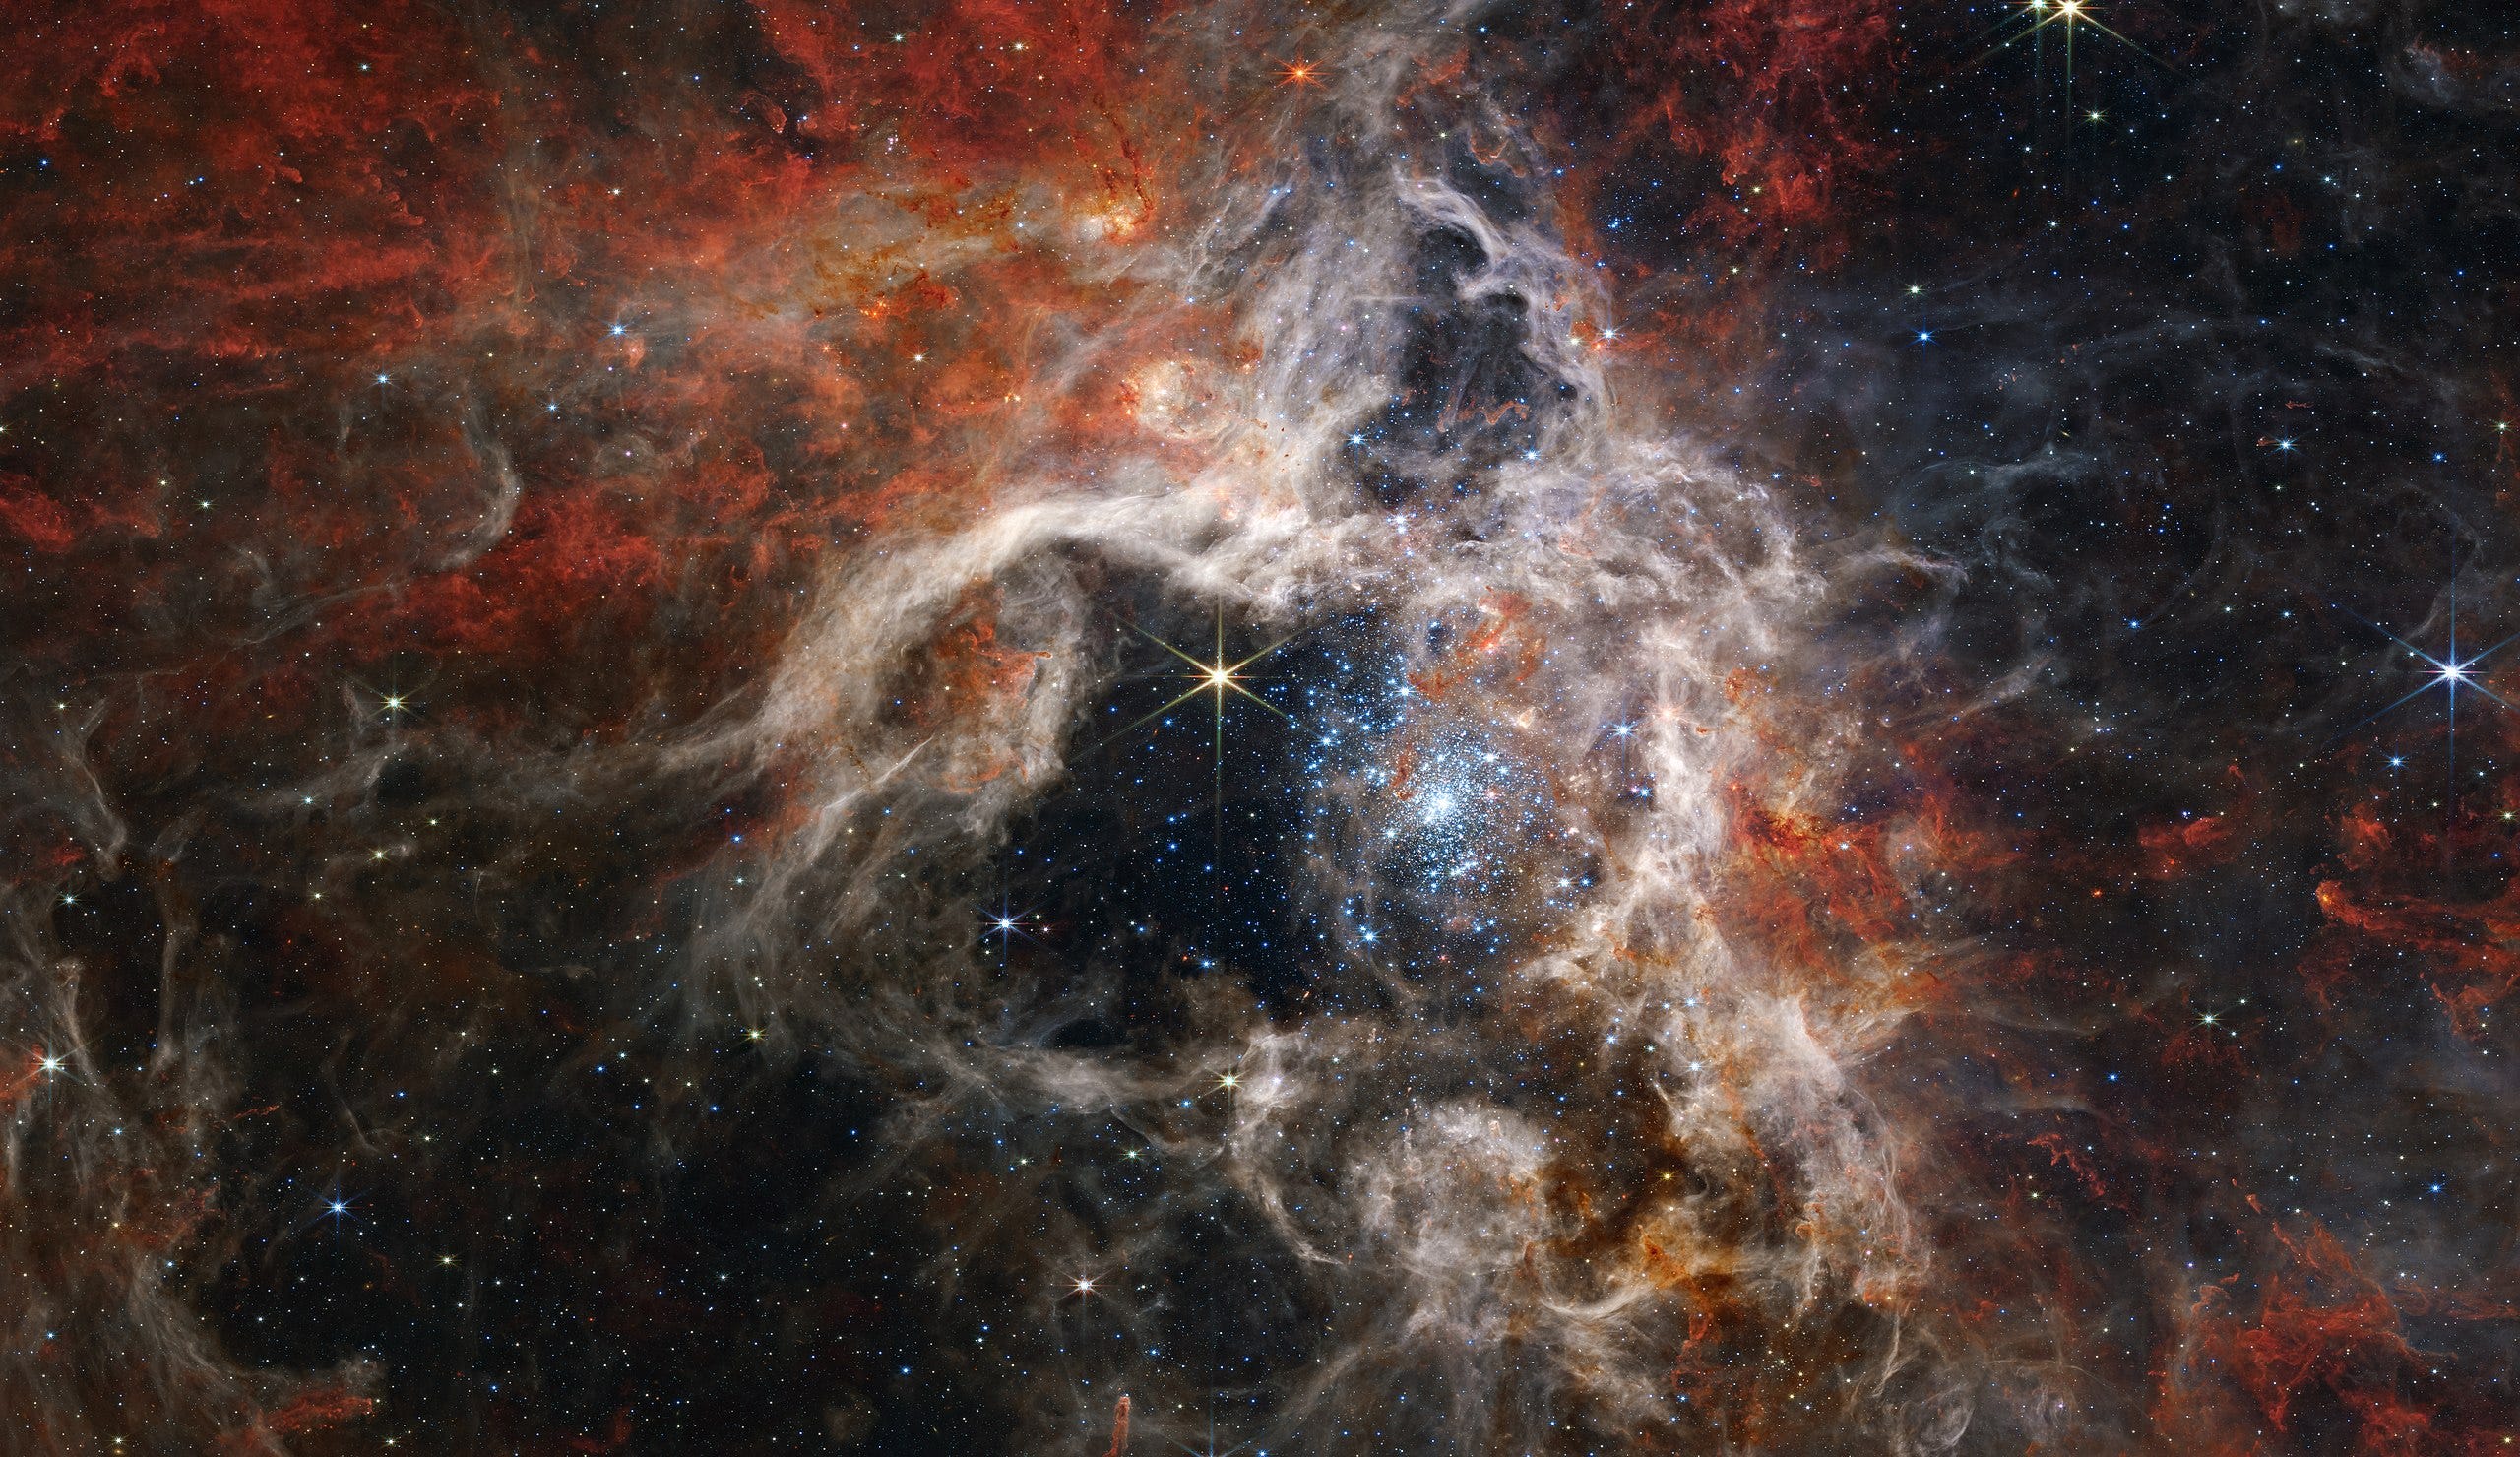 An invisible black hole has been found in the Tarantula nebula